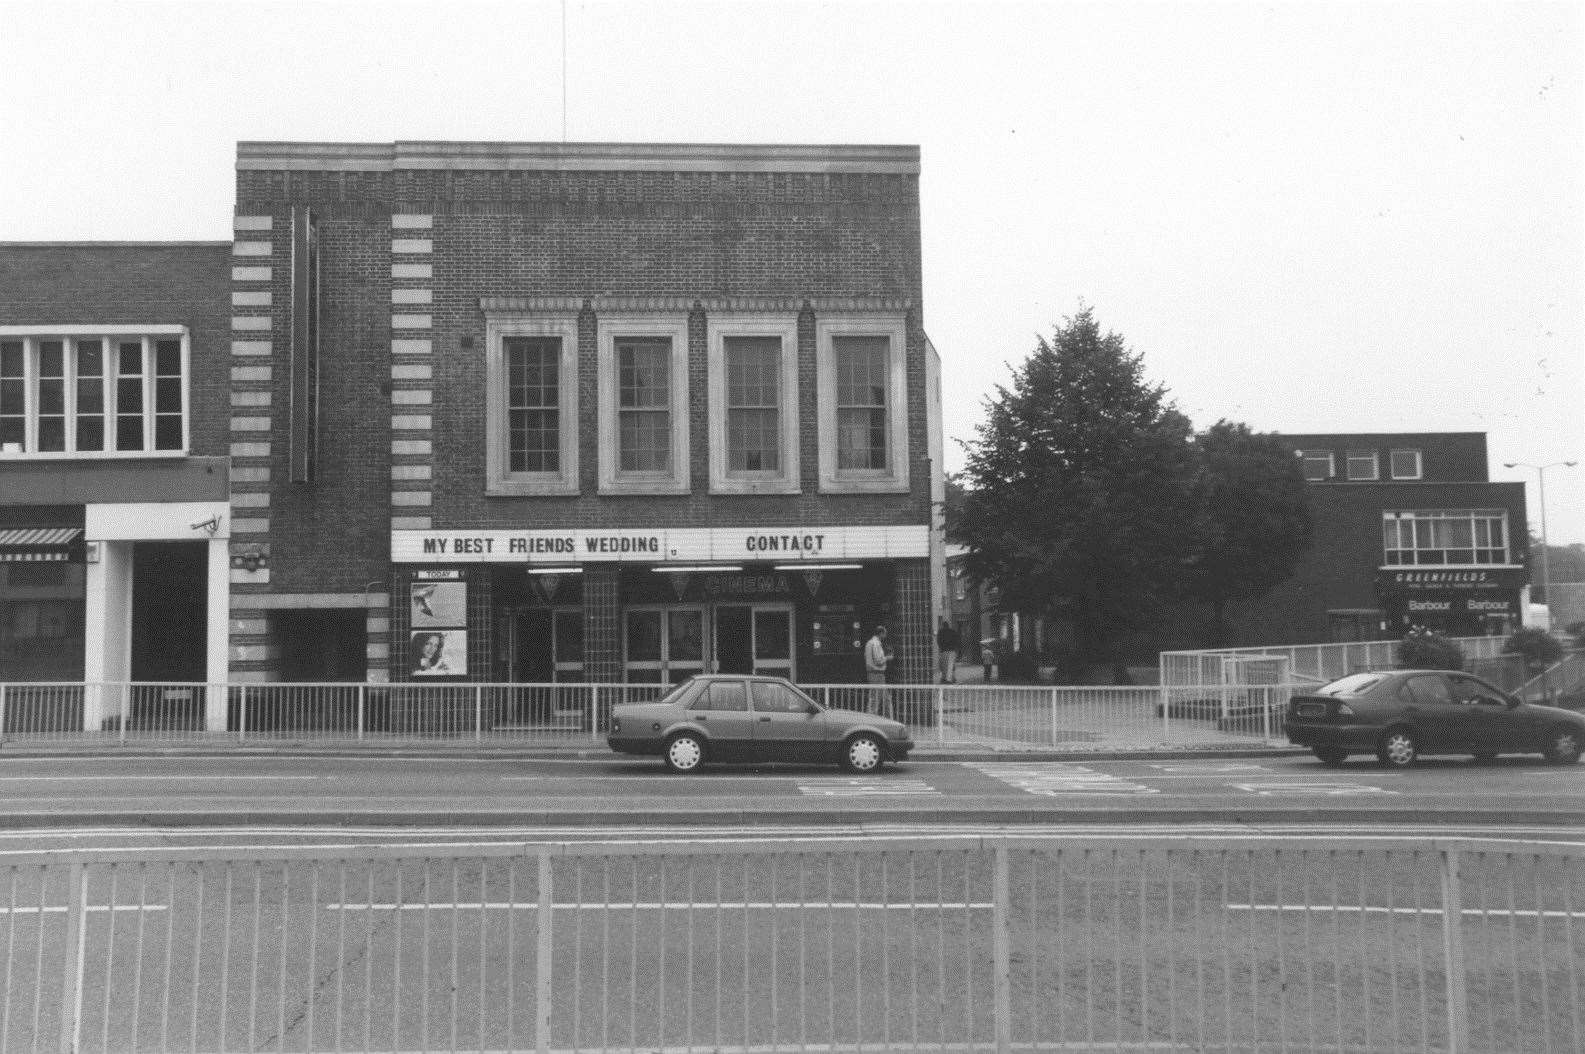 The Odeon pictured in 1997, when My Best Friend's Wedding was showing